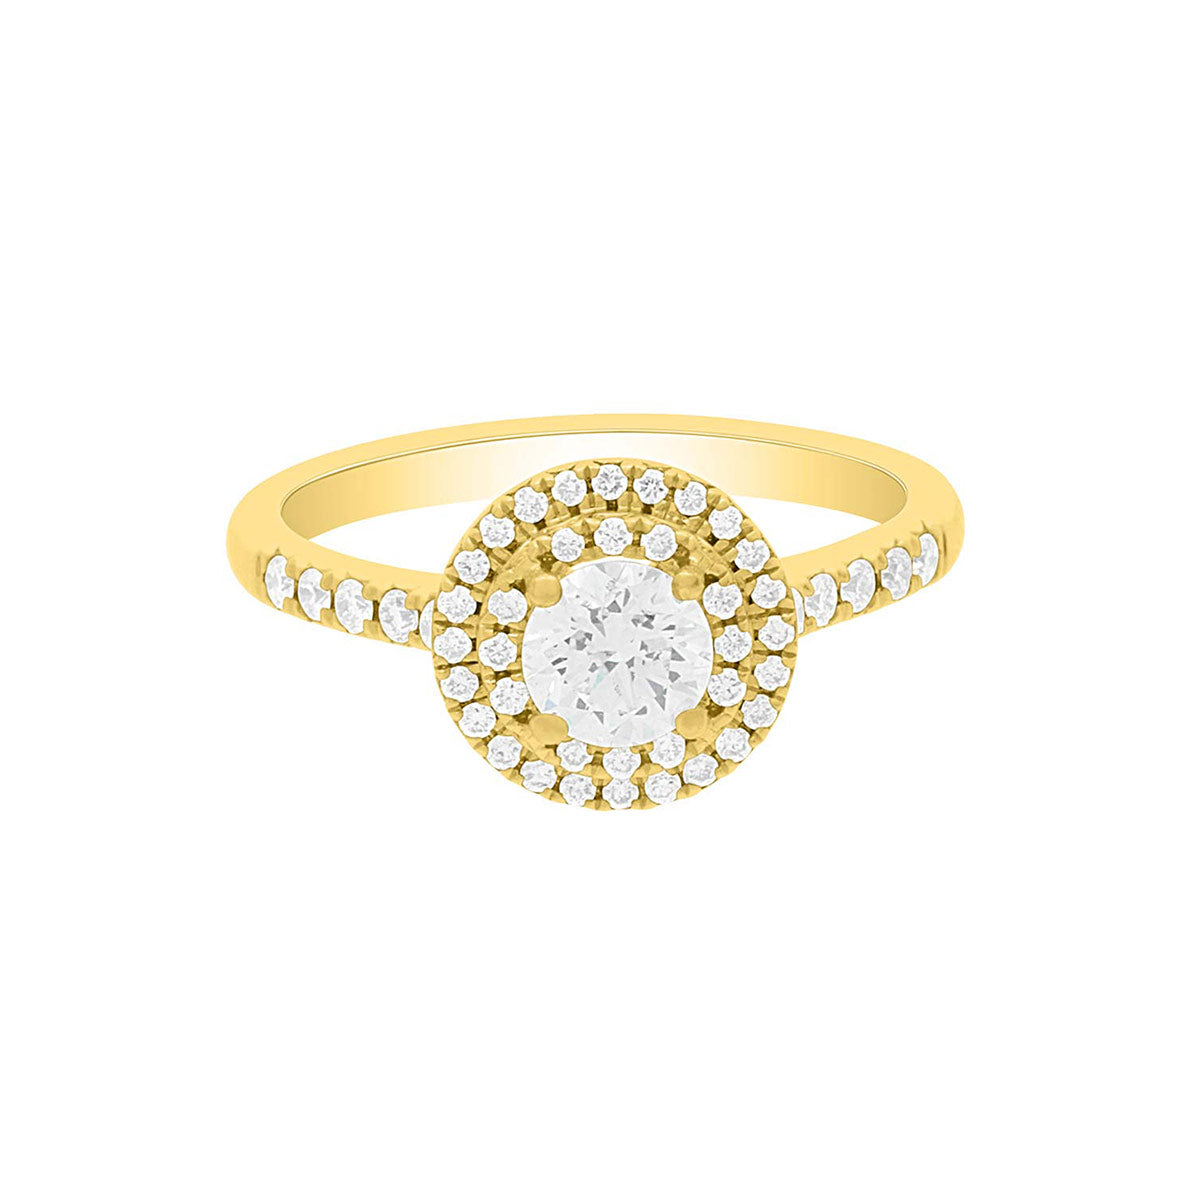 Round Double Halo Engagement Ring made of yellow gold and diamonds laying flat